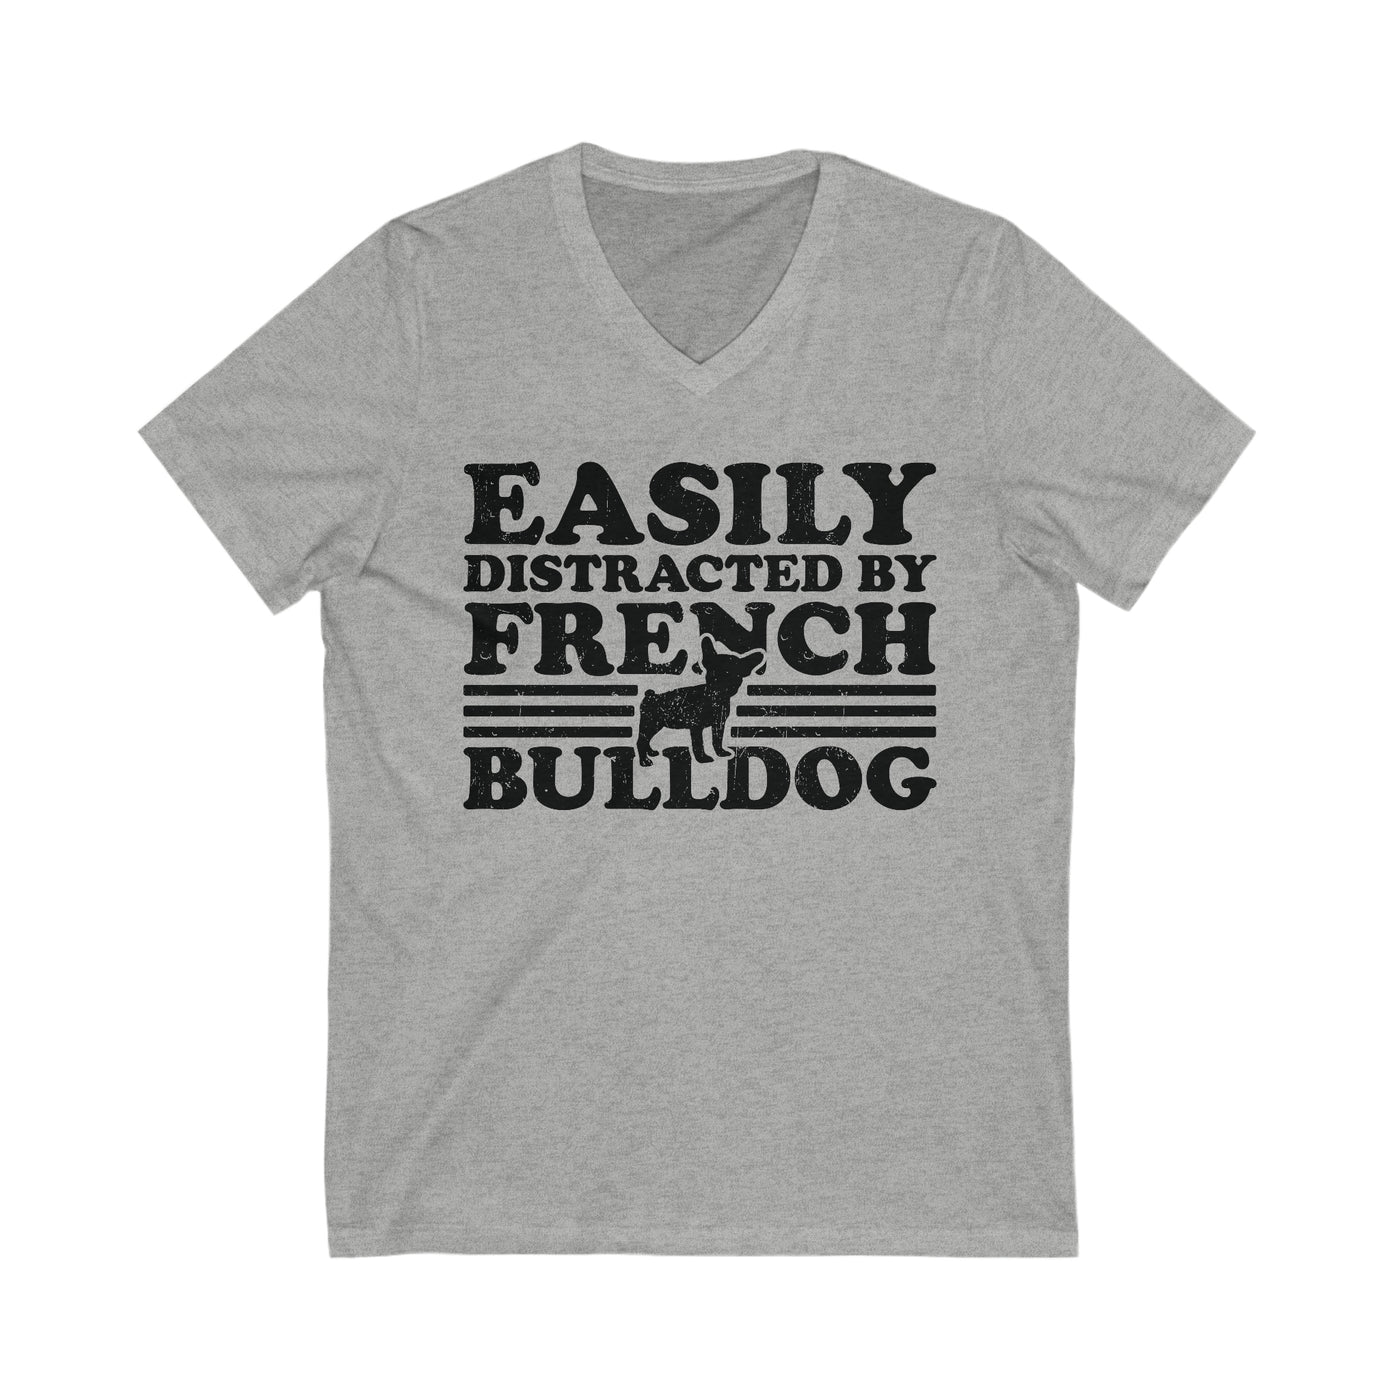 Easily Distracted By French Bulldog V-Neck